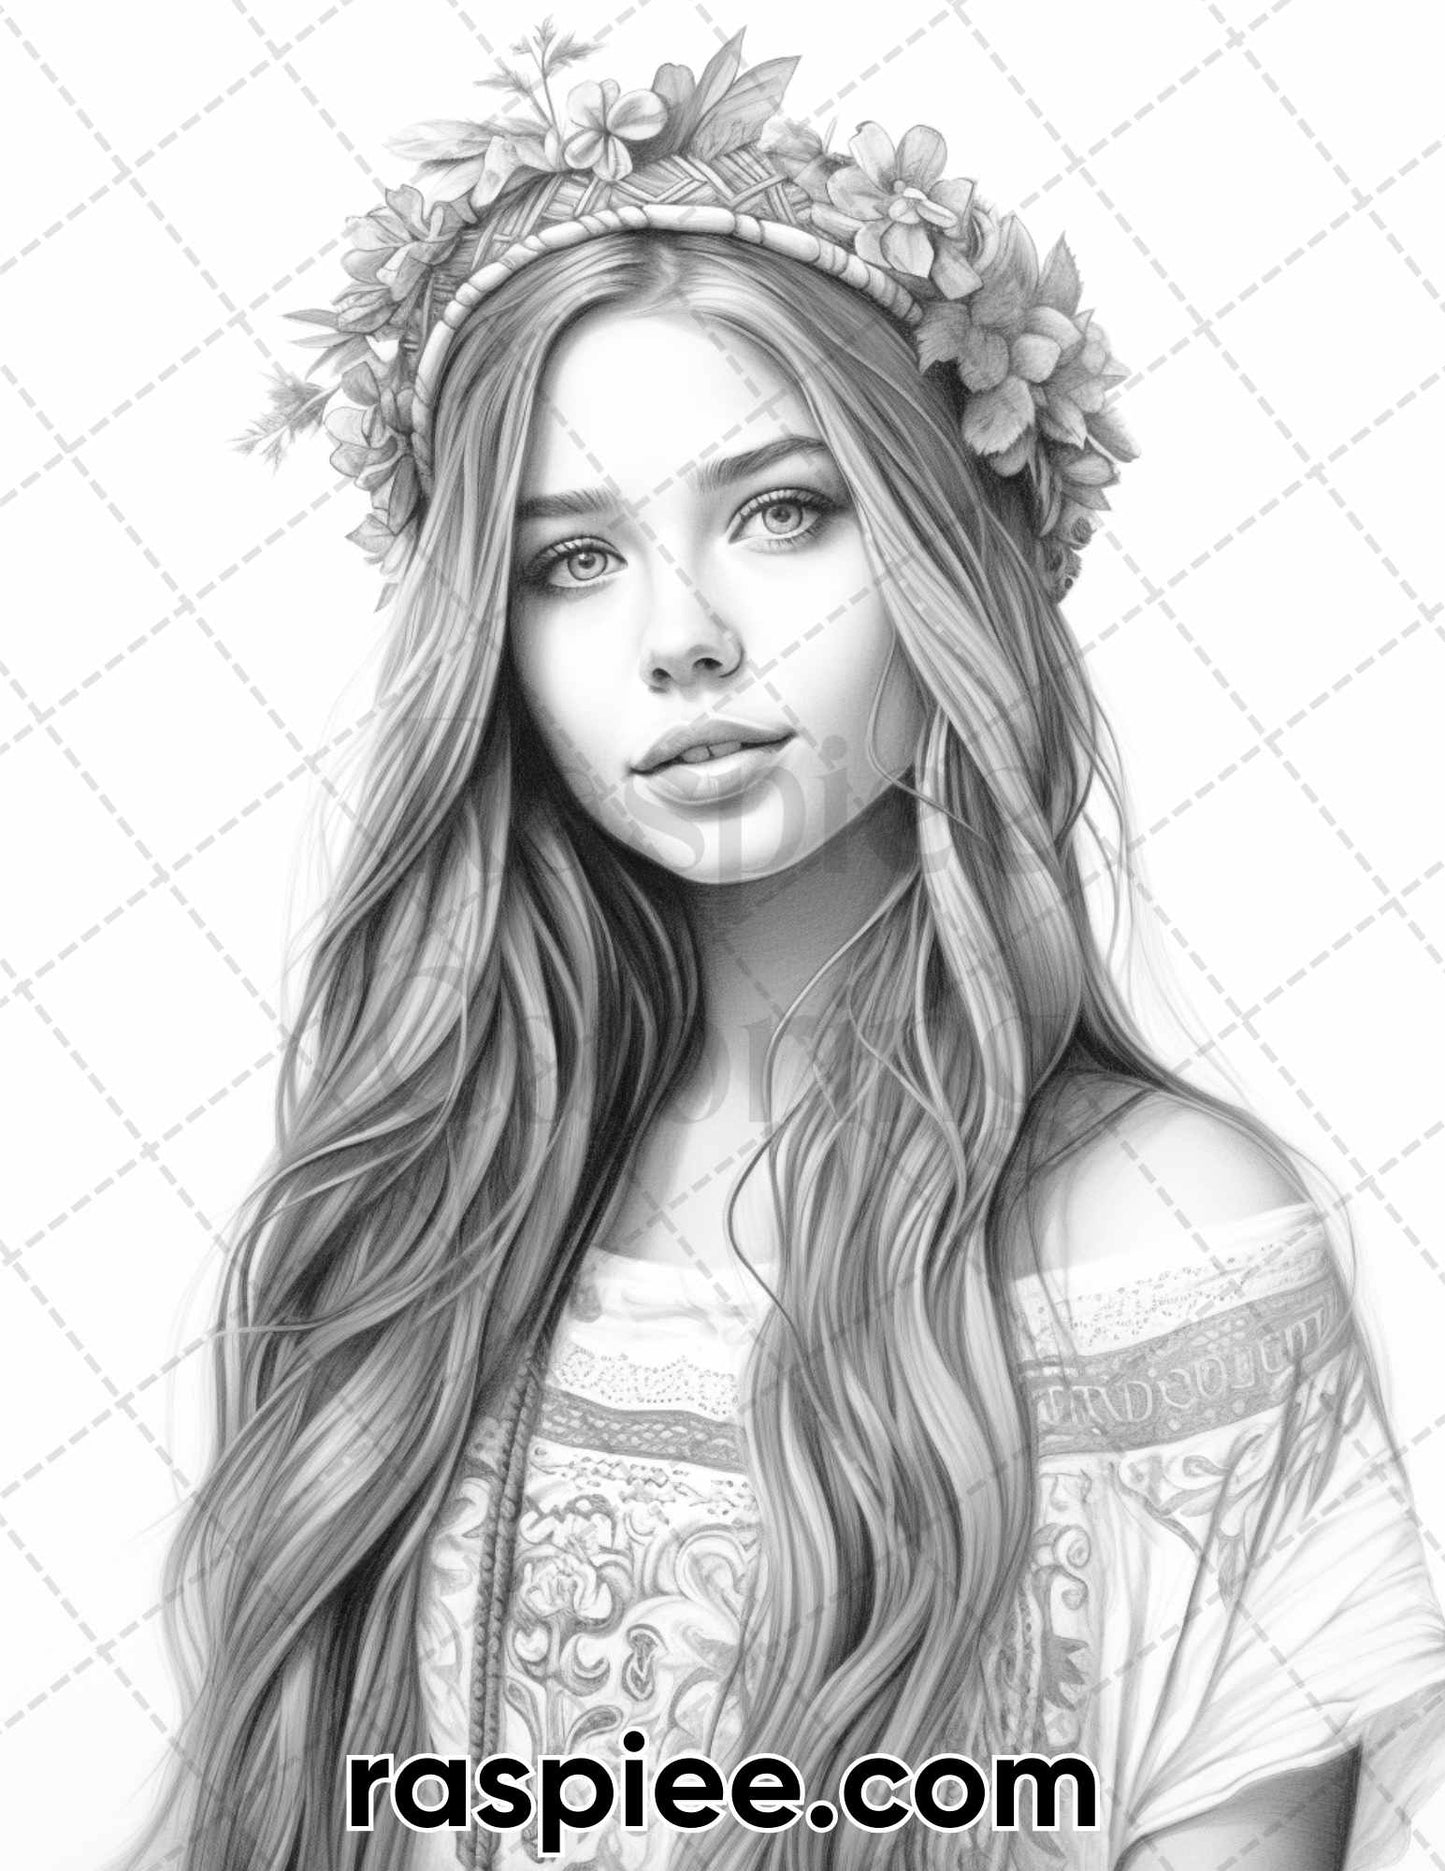 60 Bohemian Beauties Grayscale Coloring Pages for Adults, Printable PDF Instant Download